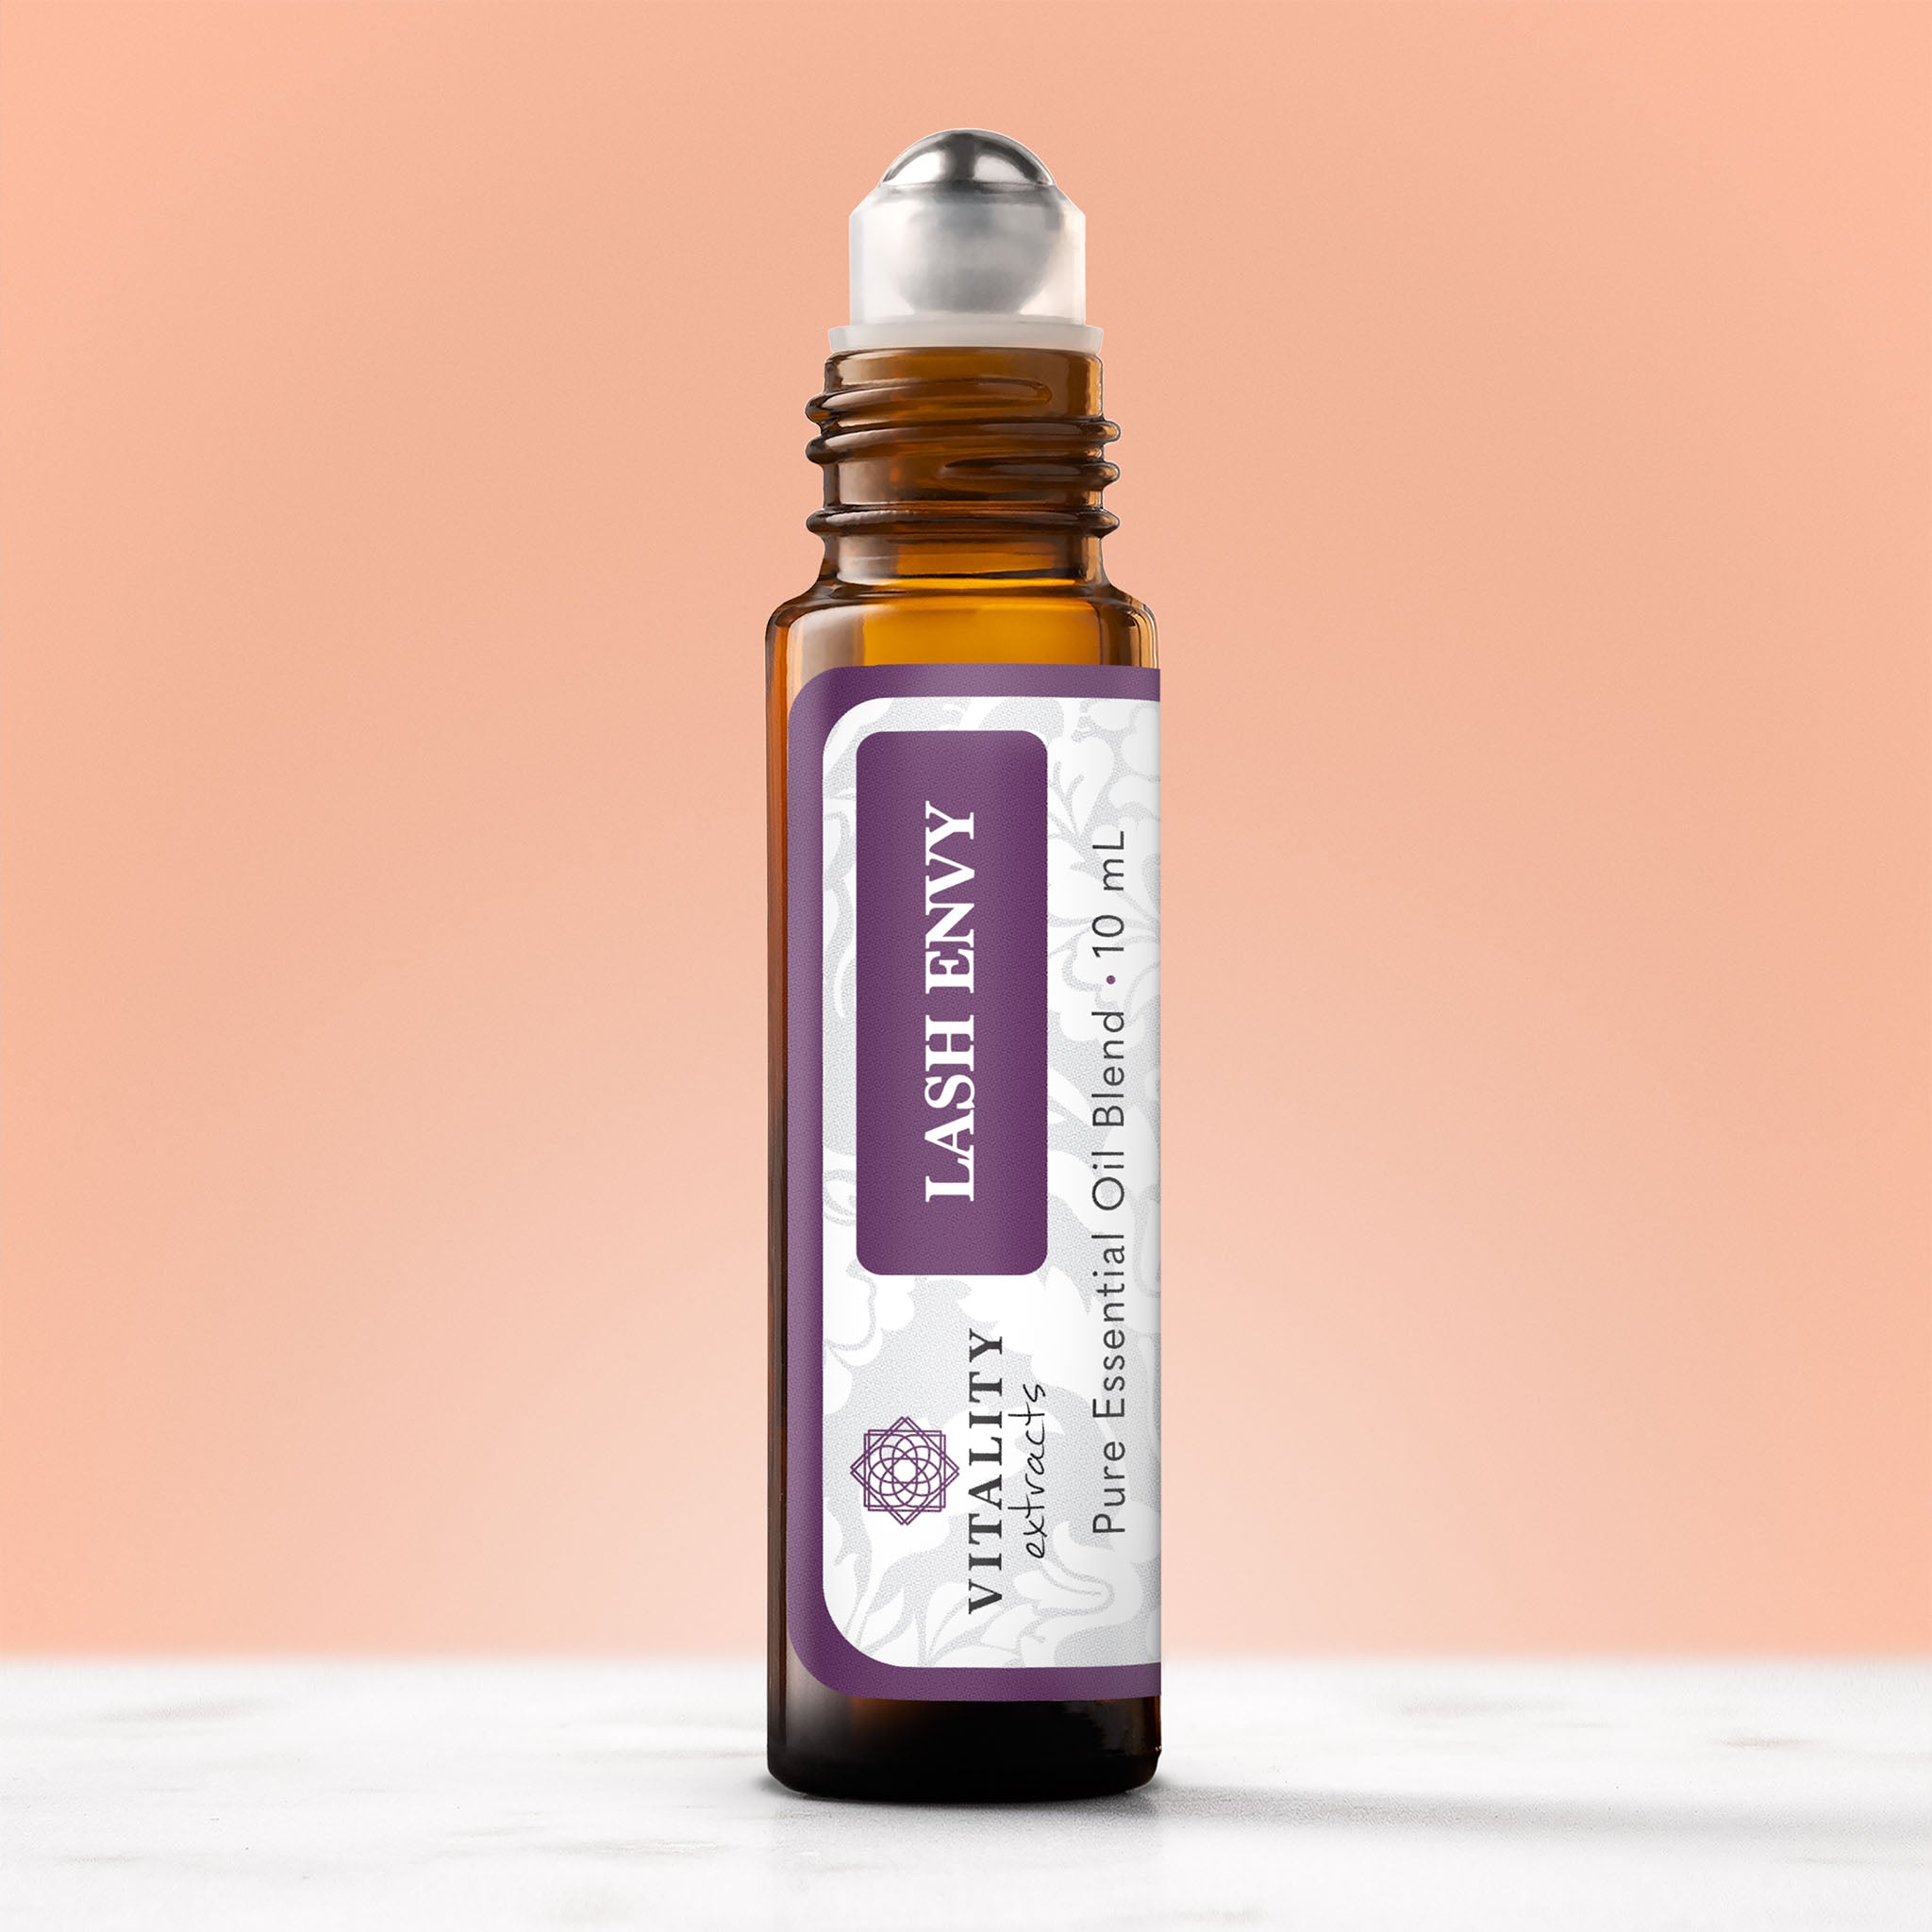 Lash Envy Essential Oil Blend - Vitality Extracts, 30ml